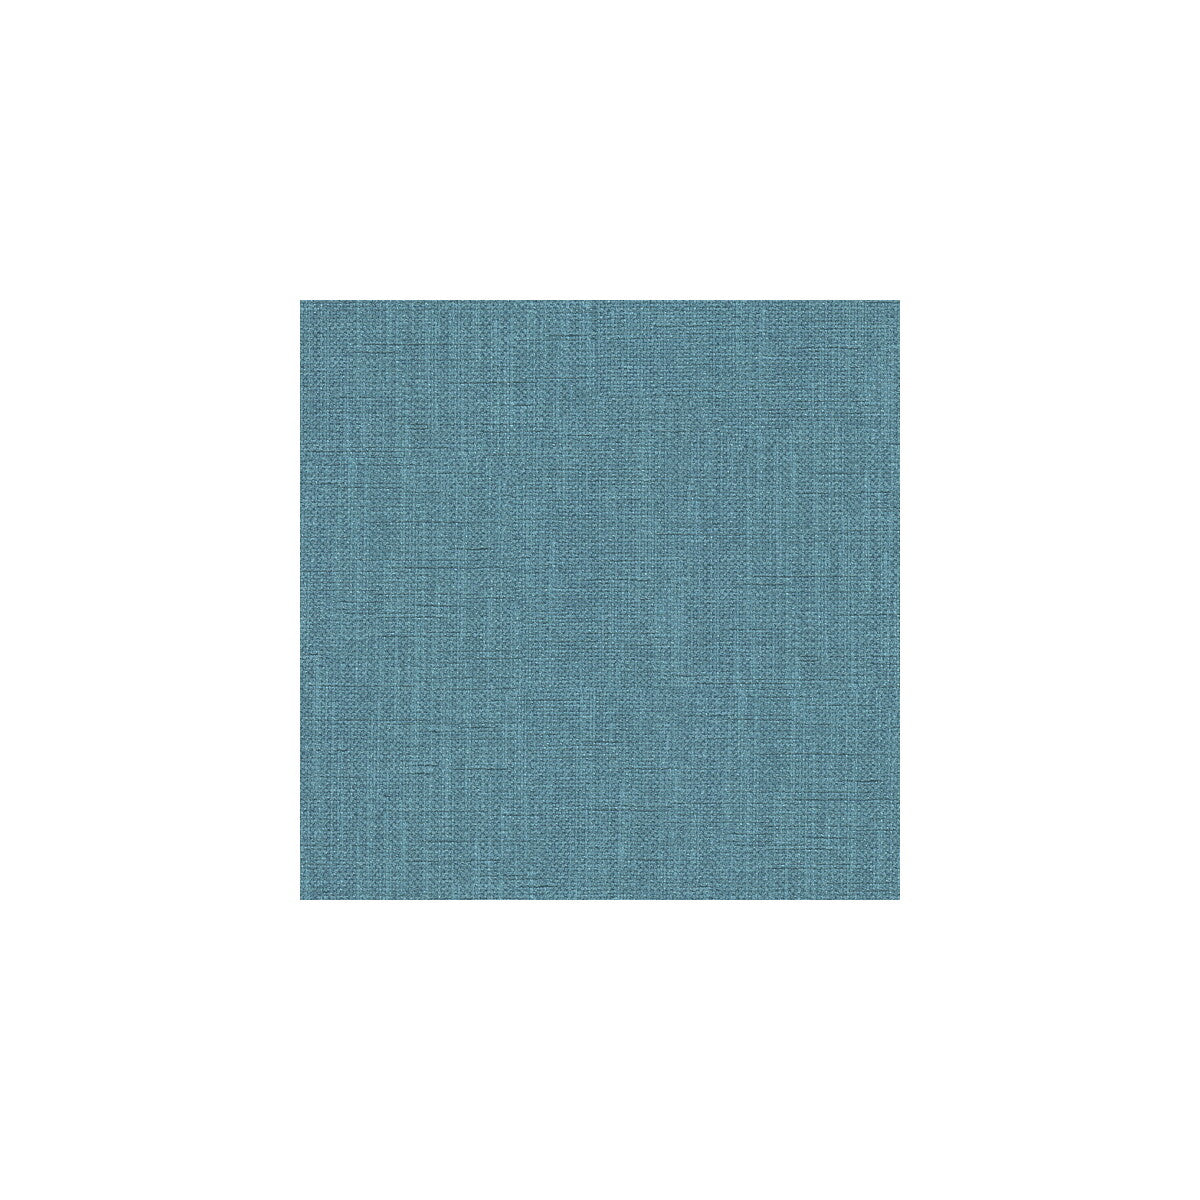 Kravet Basics fabric in 33120-505 color - pattern 33120.505.0 - by Kravet Basics in the Perfect Plains collection